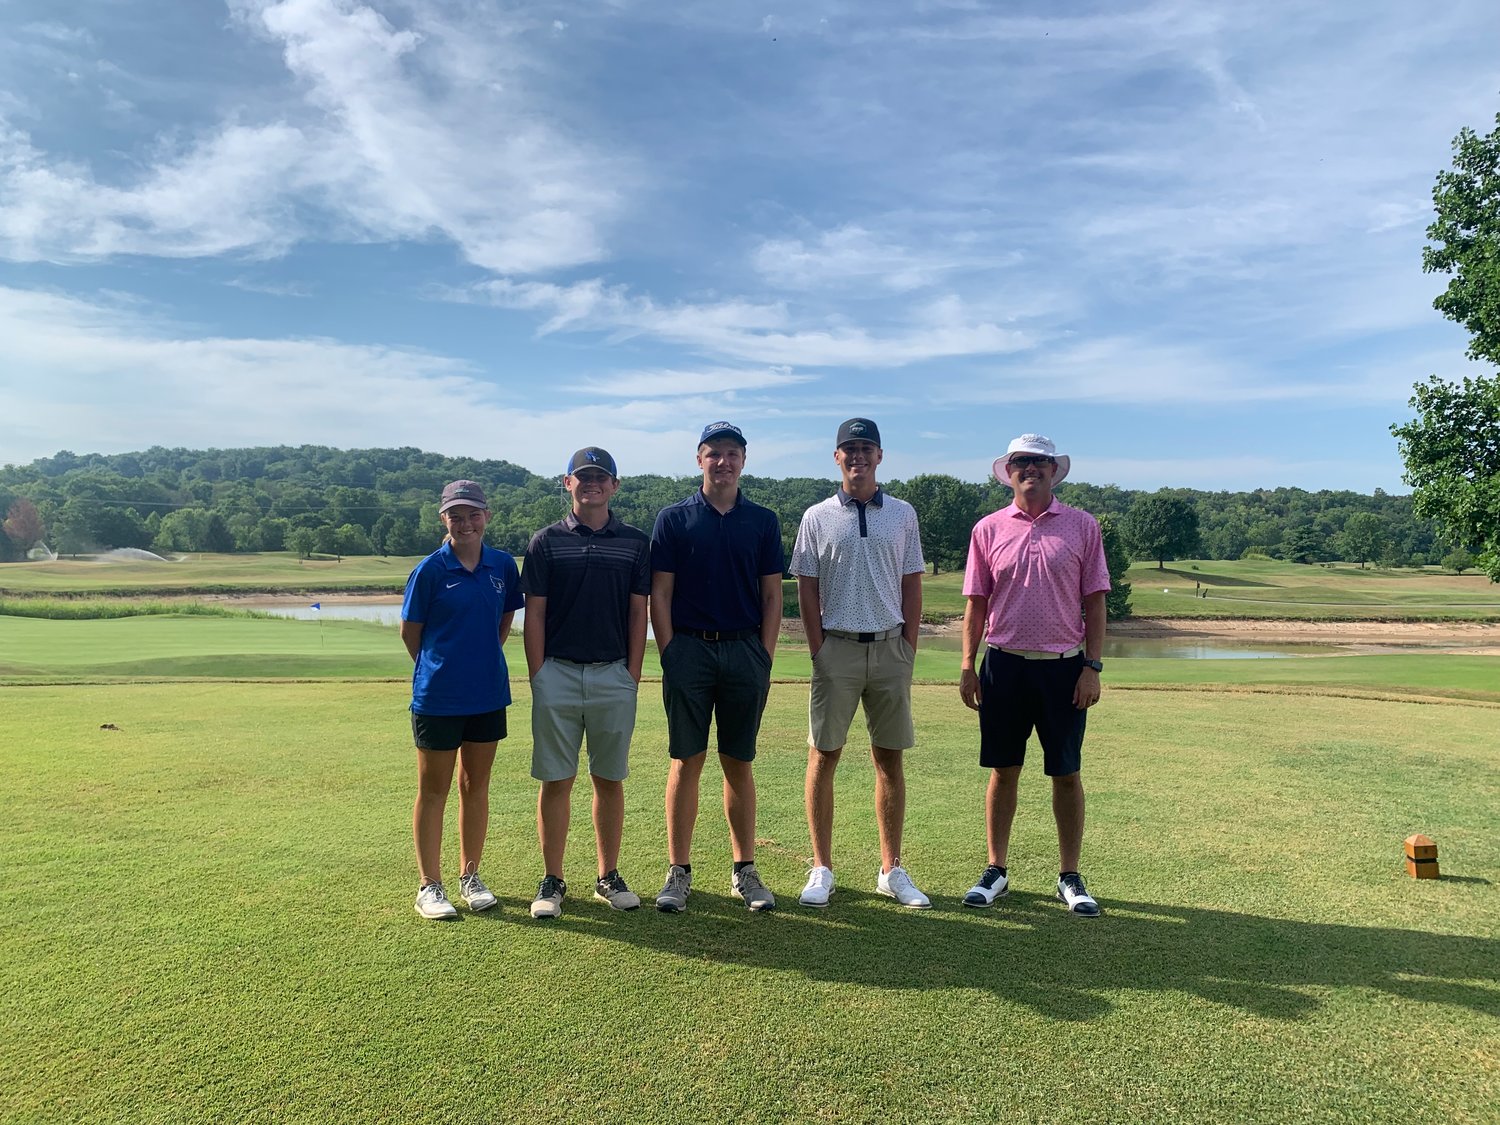 High school golf team members got a chance to learn and spend time with a real professional golfer. Talk about a hole in one! From left to right: Marlee Edgeman, Michael Alves, Wyatt Davis, Luke Gardner, and Mark Budler